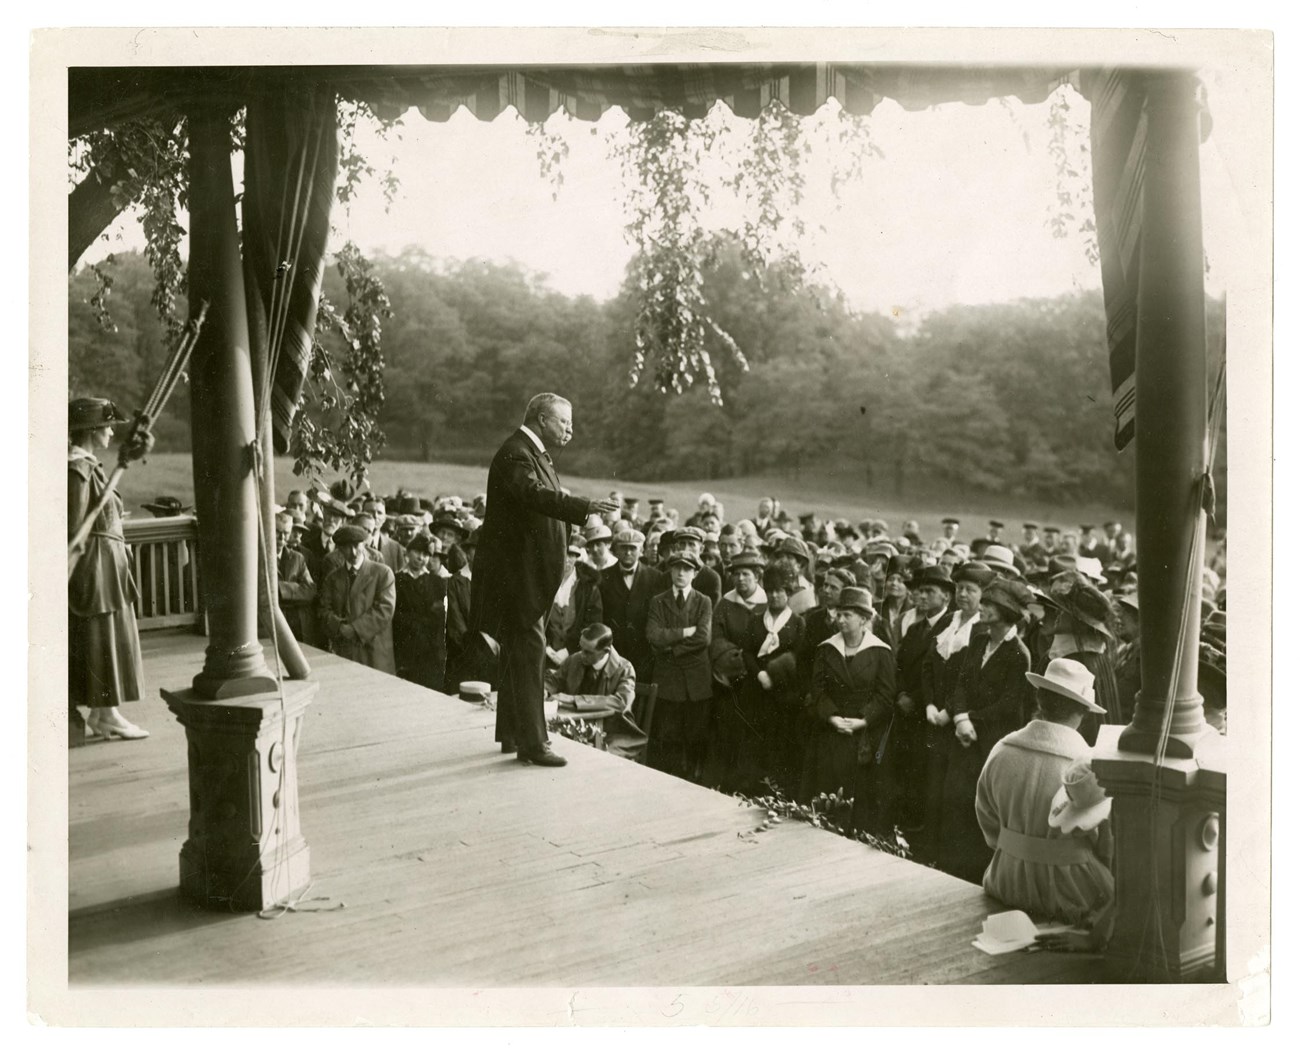 Theodore Roosevelt stands on the porch of Sagamore Hill speaking to a crowd of woman suffragists who stand before him on the lawn. NPS Photo